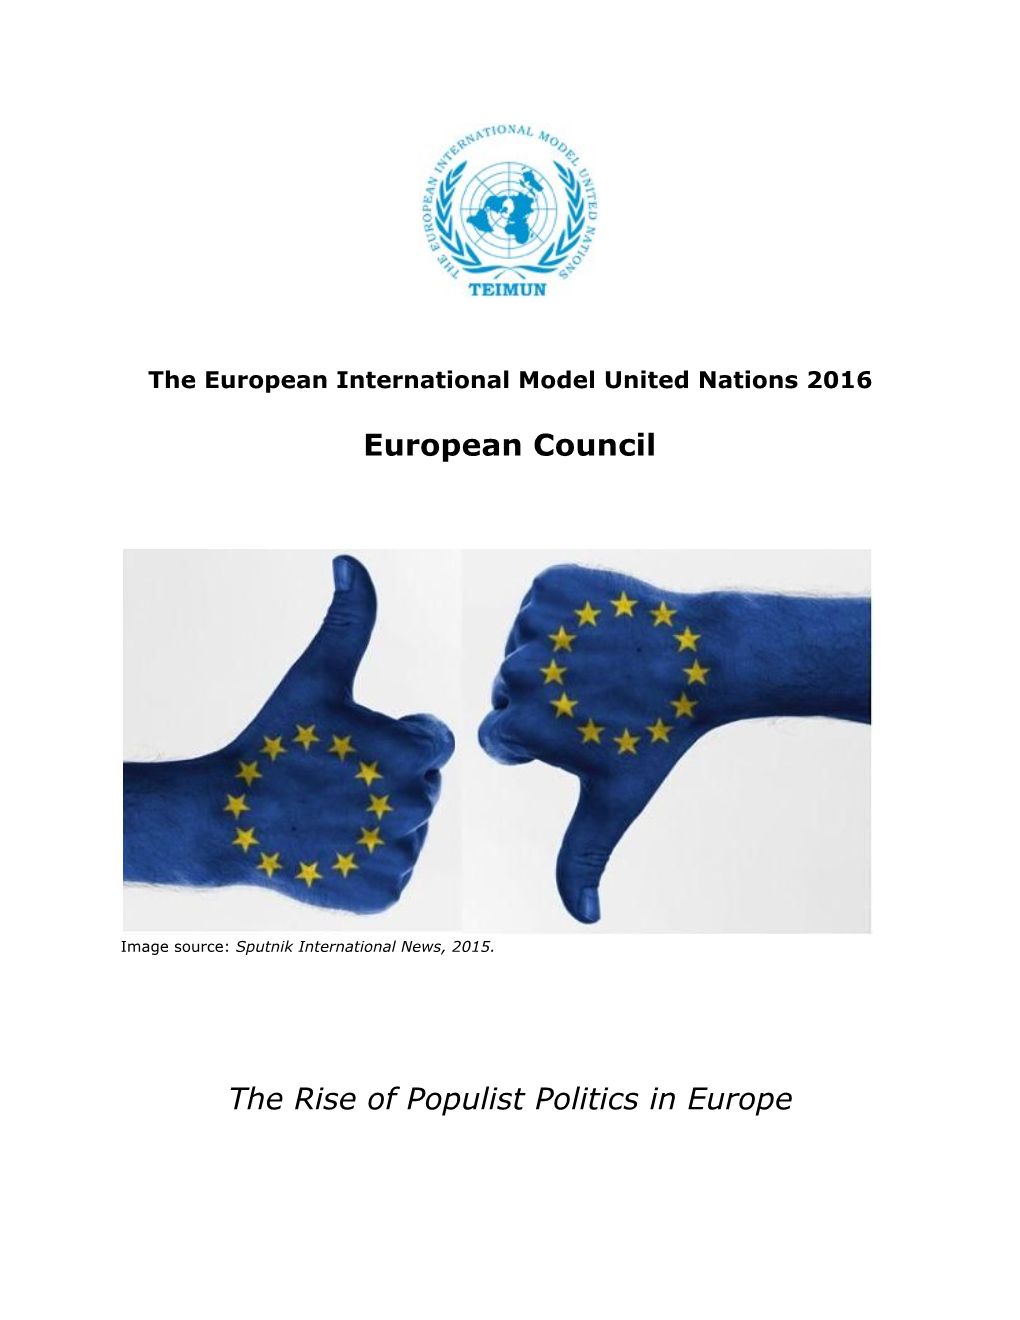 European Council the Rise of Populist Politics in Europe